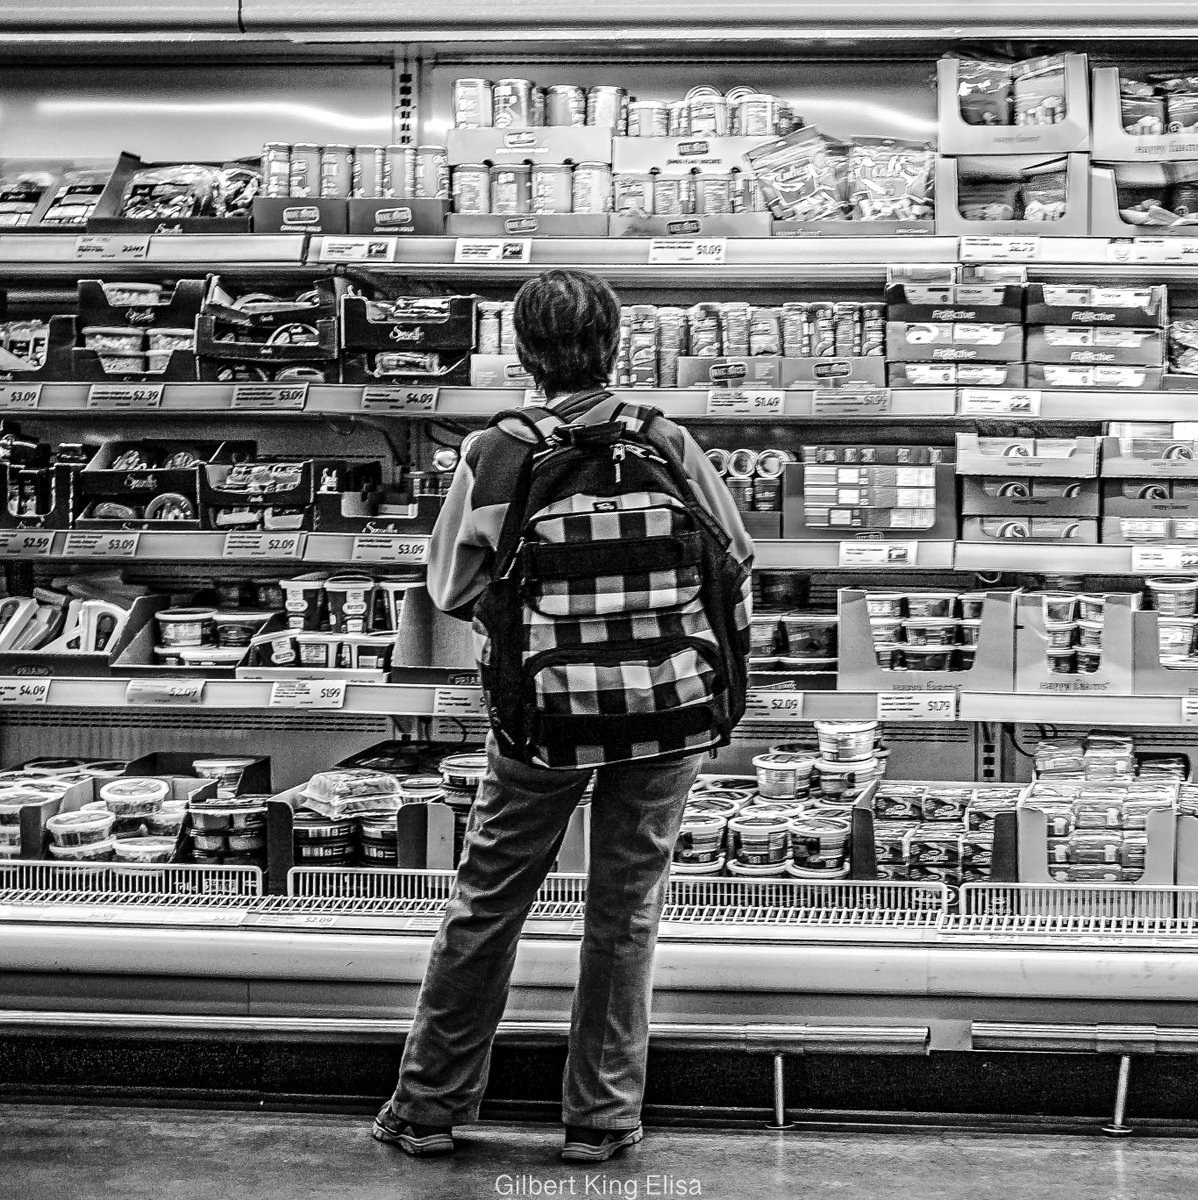 'I Could Almost Taste It'; The Price of Things

#GilbertKingElisa #streetphotography #photography #bnw #monochrome #streetphotographer #blackandwhite #eating #photography #friends #dinnerplans #thinking #blackandwhitephotography #monotone #supermarket  #walking #food #monochrome…